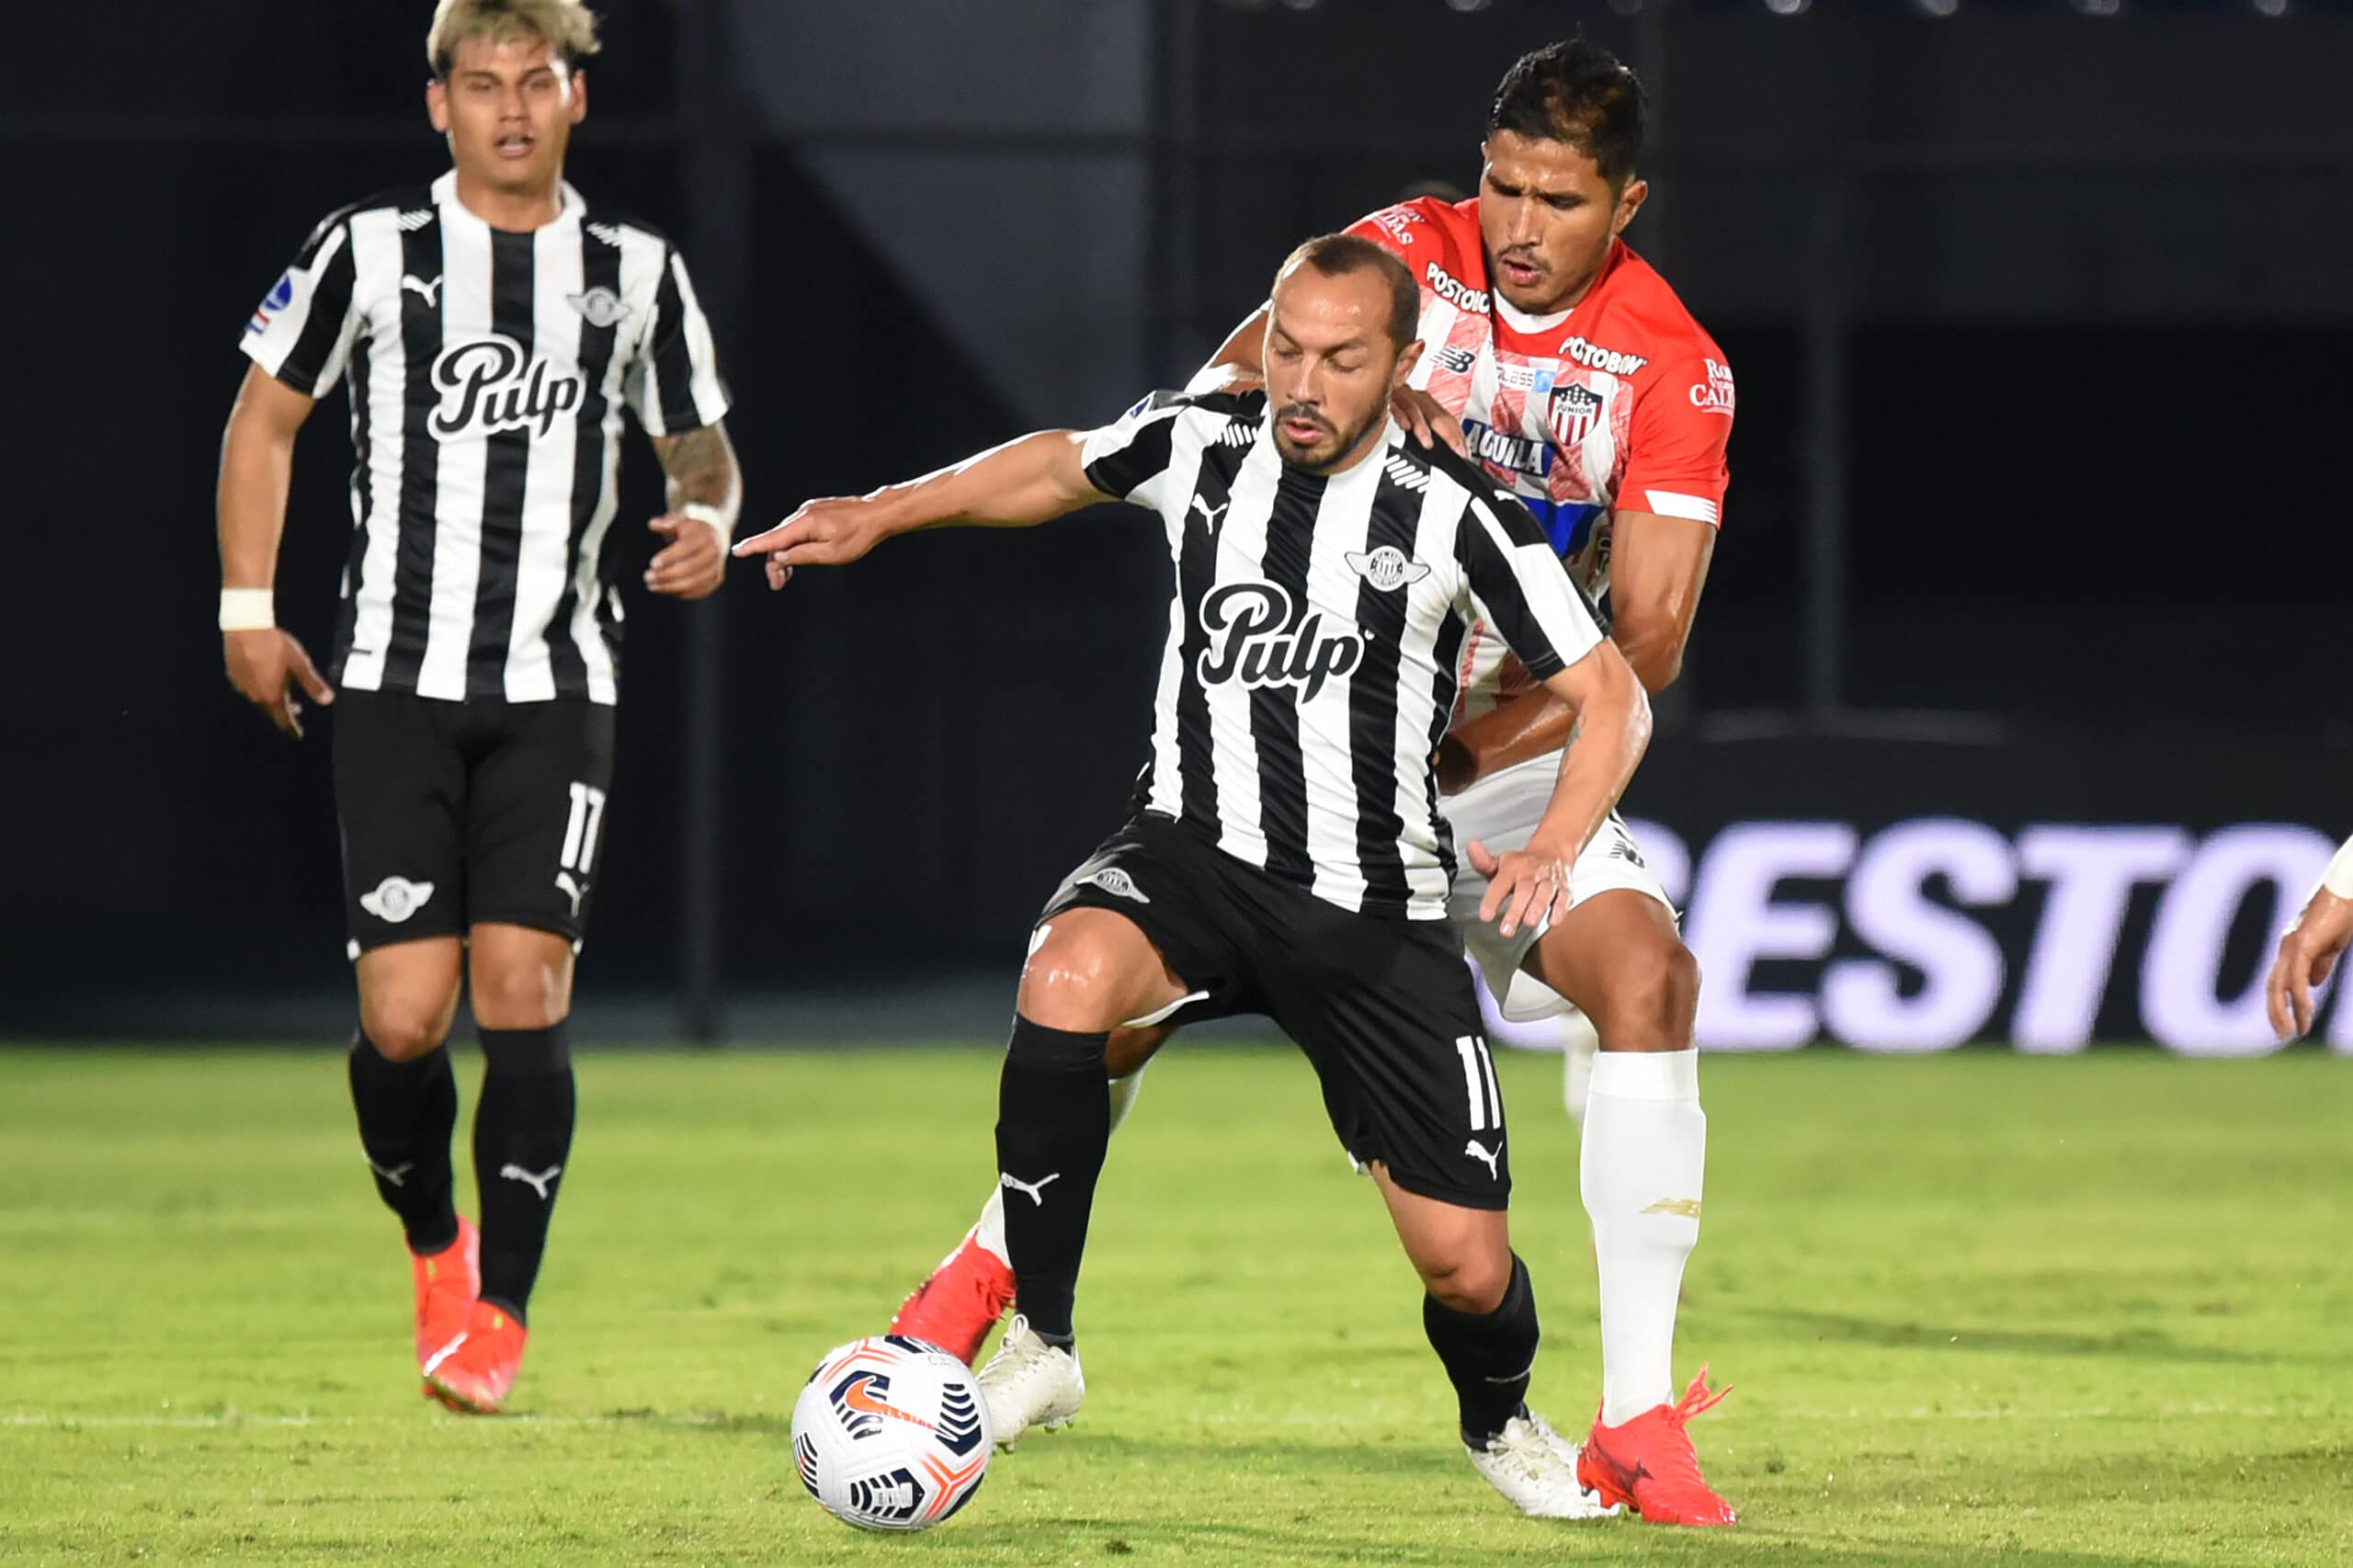 ASUNCION, PARAGUAY - JULY 21: Marcelo Díaz of Libertad competes for the ball with Larry Vásquez of Junior during a round of sixteen second leg match between Libertad and Junior as part of Copa CONMEBOL Sudamericana 2021 at Estadio Defensores del Chaco on July 21, 2021 in Asuncion, Paraguay. (Photo by Christian Alvarenga/Getty Images)